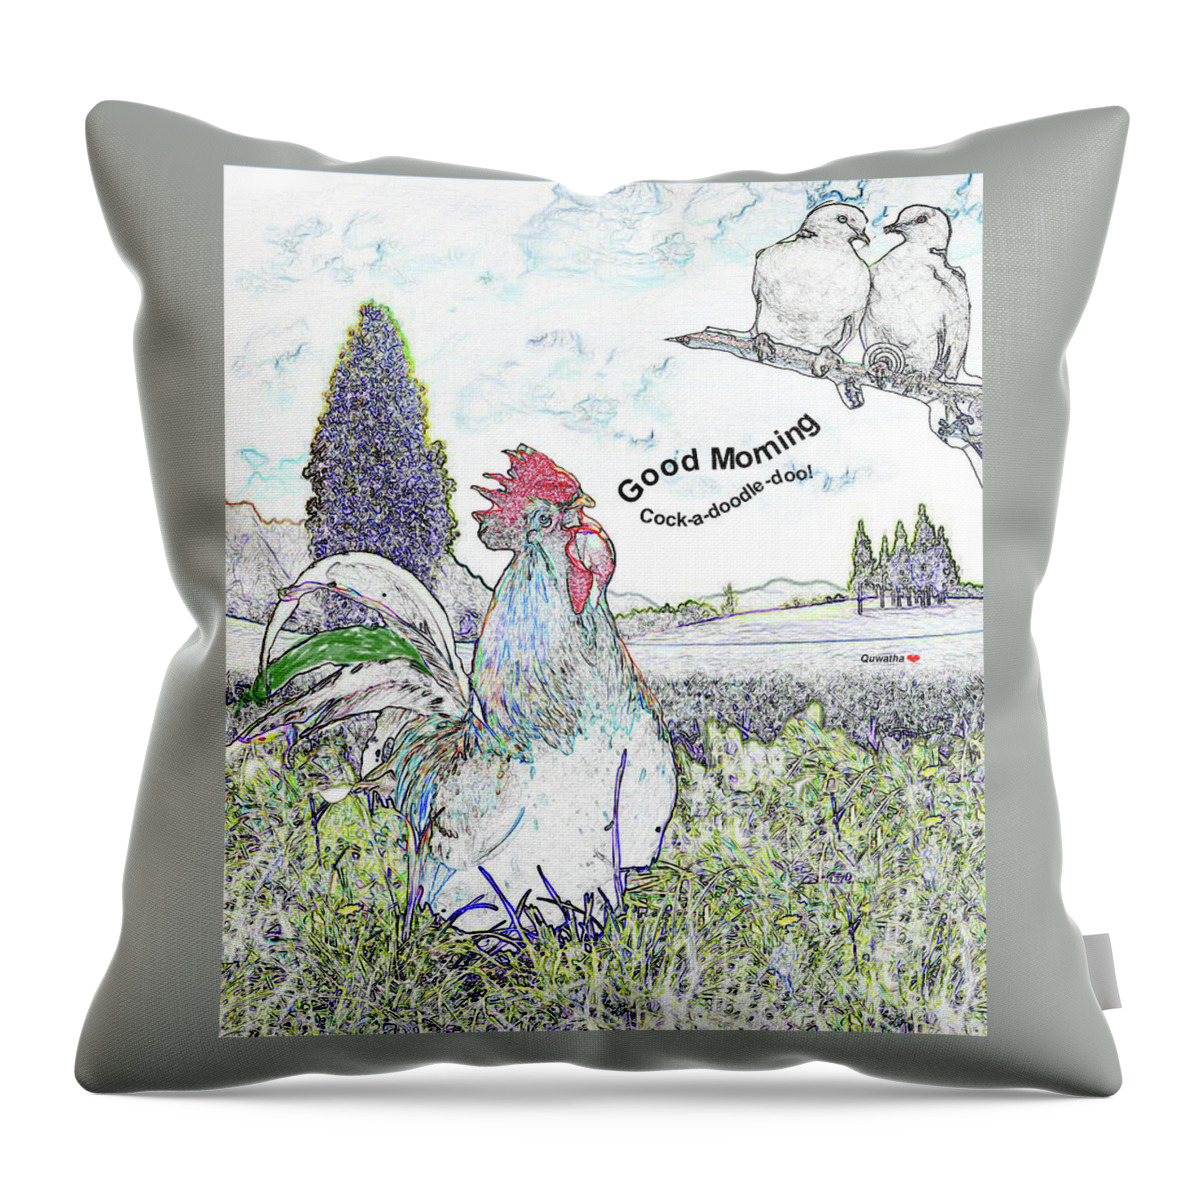 Rooster Throw Pillow featuring the drawing Good Morning by Quwatha Valentine